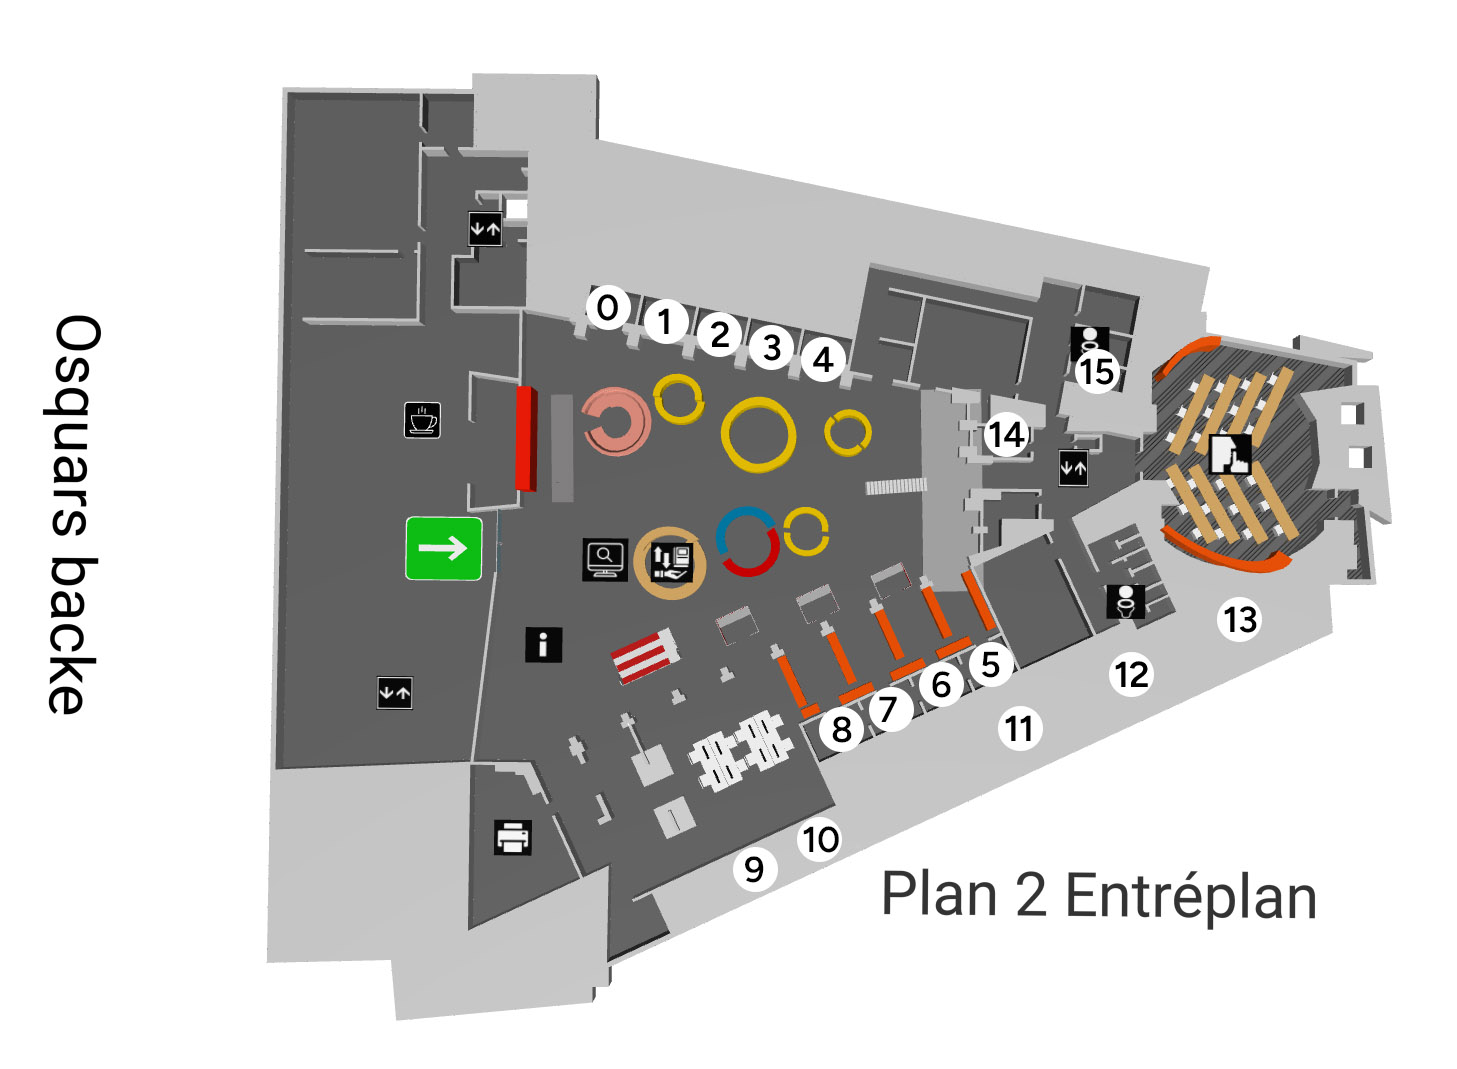 Map of the library and group rooms placement.